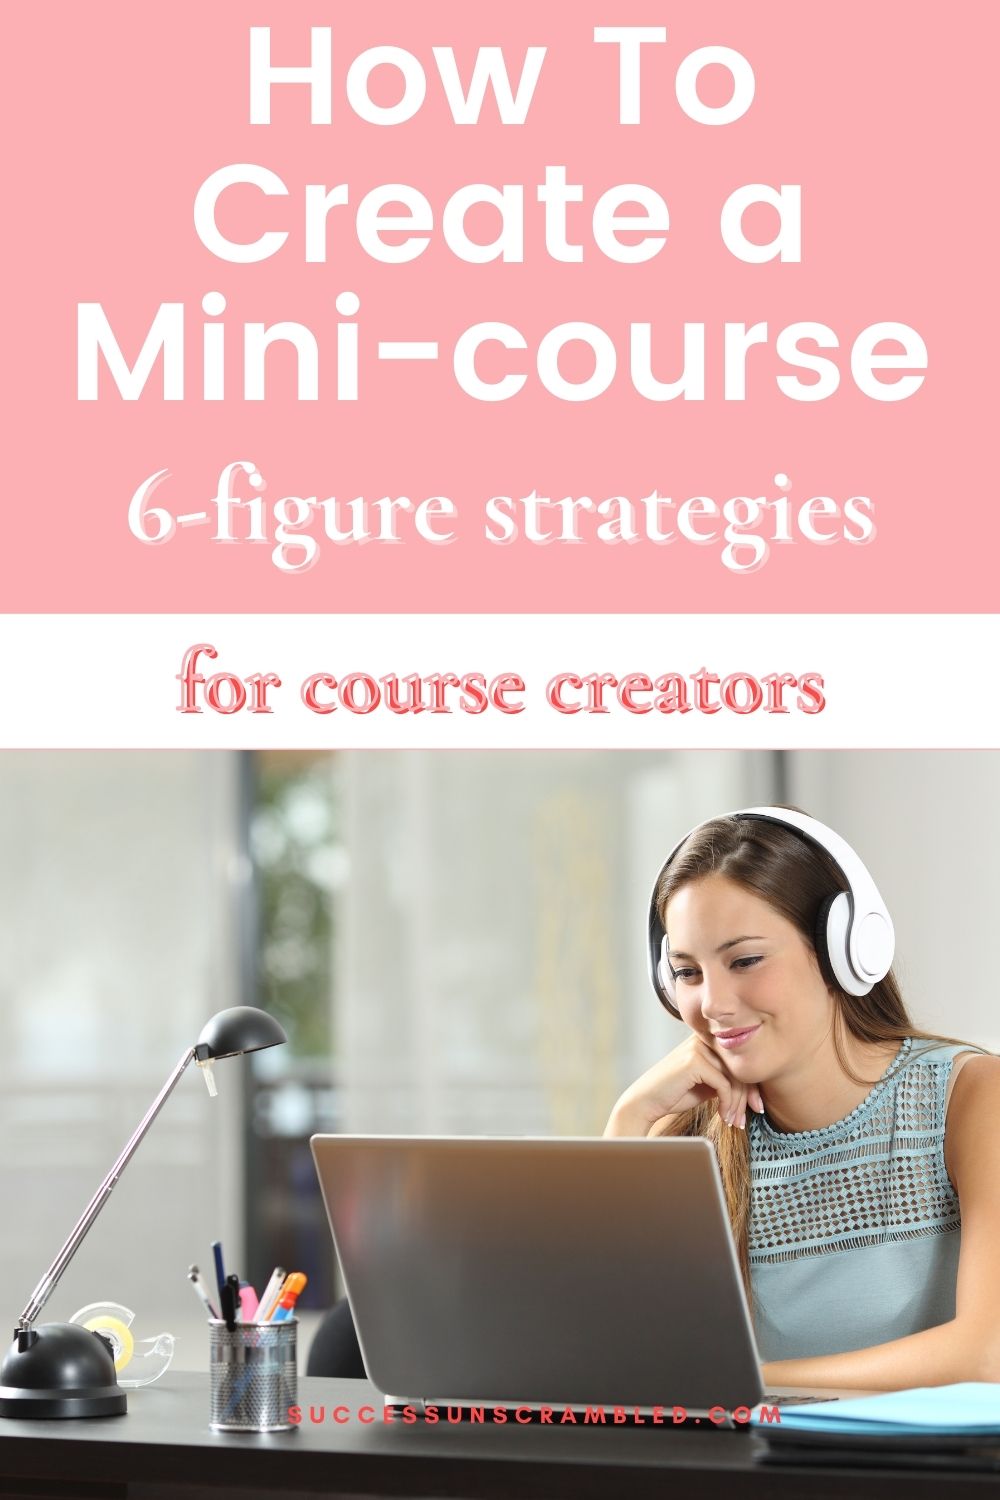 a photo of a woman smiling with headphones on looking at her laptop screen - marketing a mini course